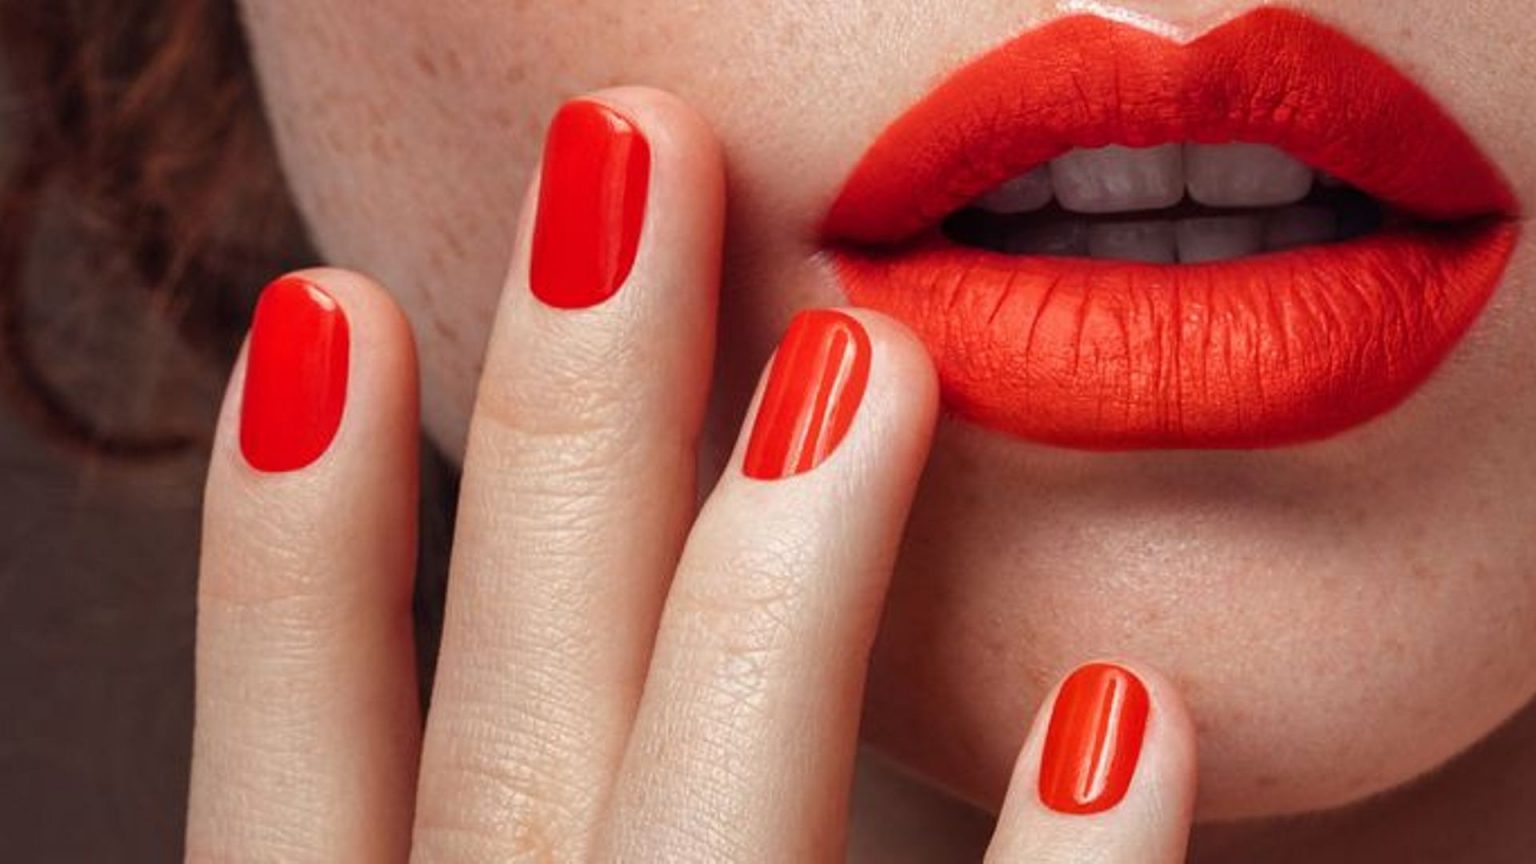 Shellac vs Gel Manicure: Which is Better for Nail Health? - wide 6